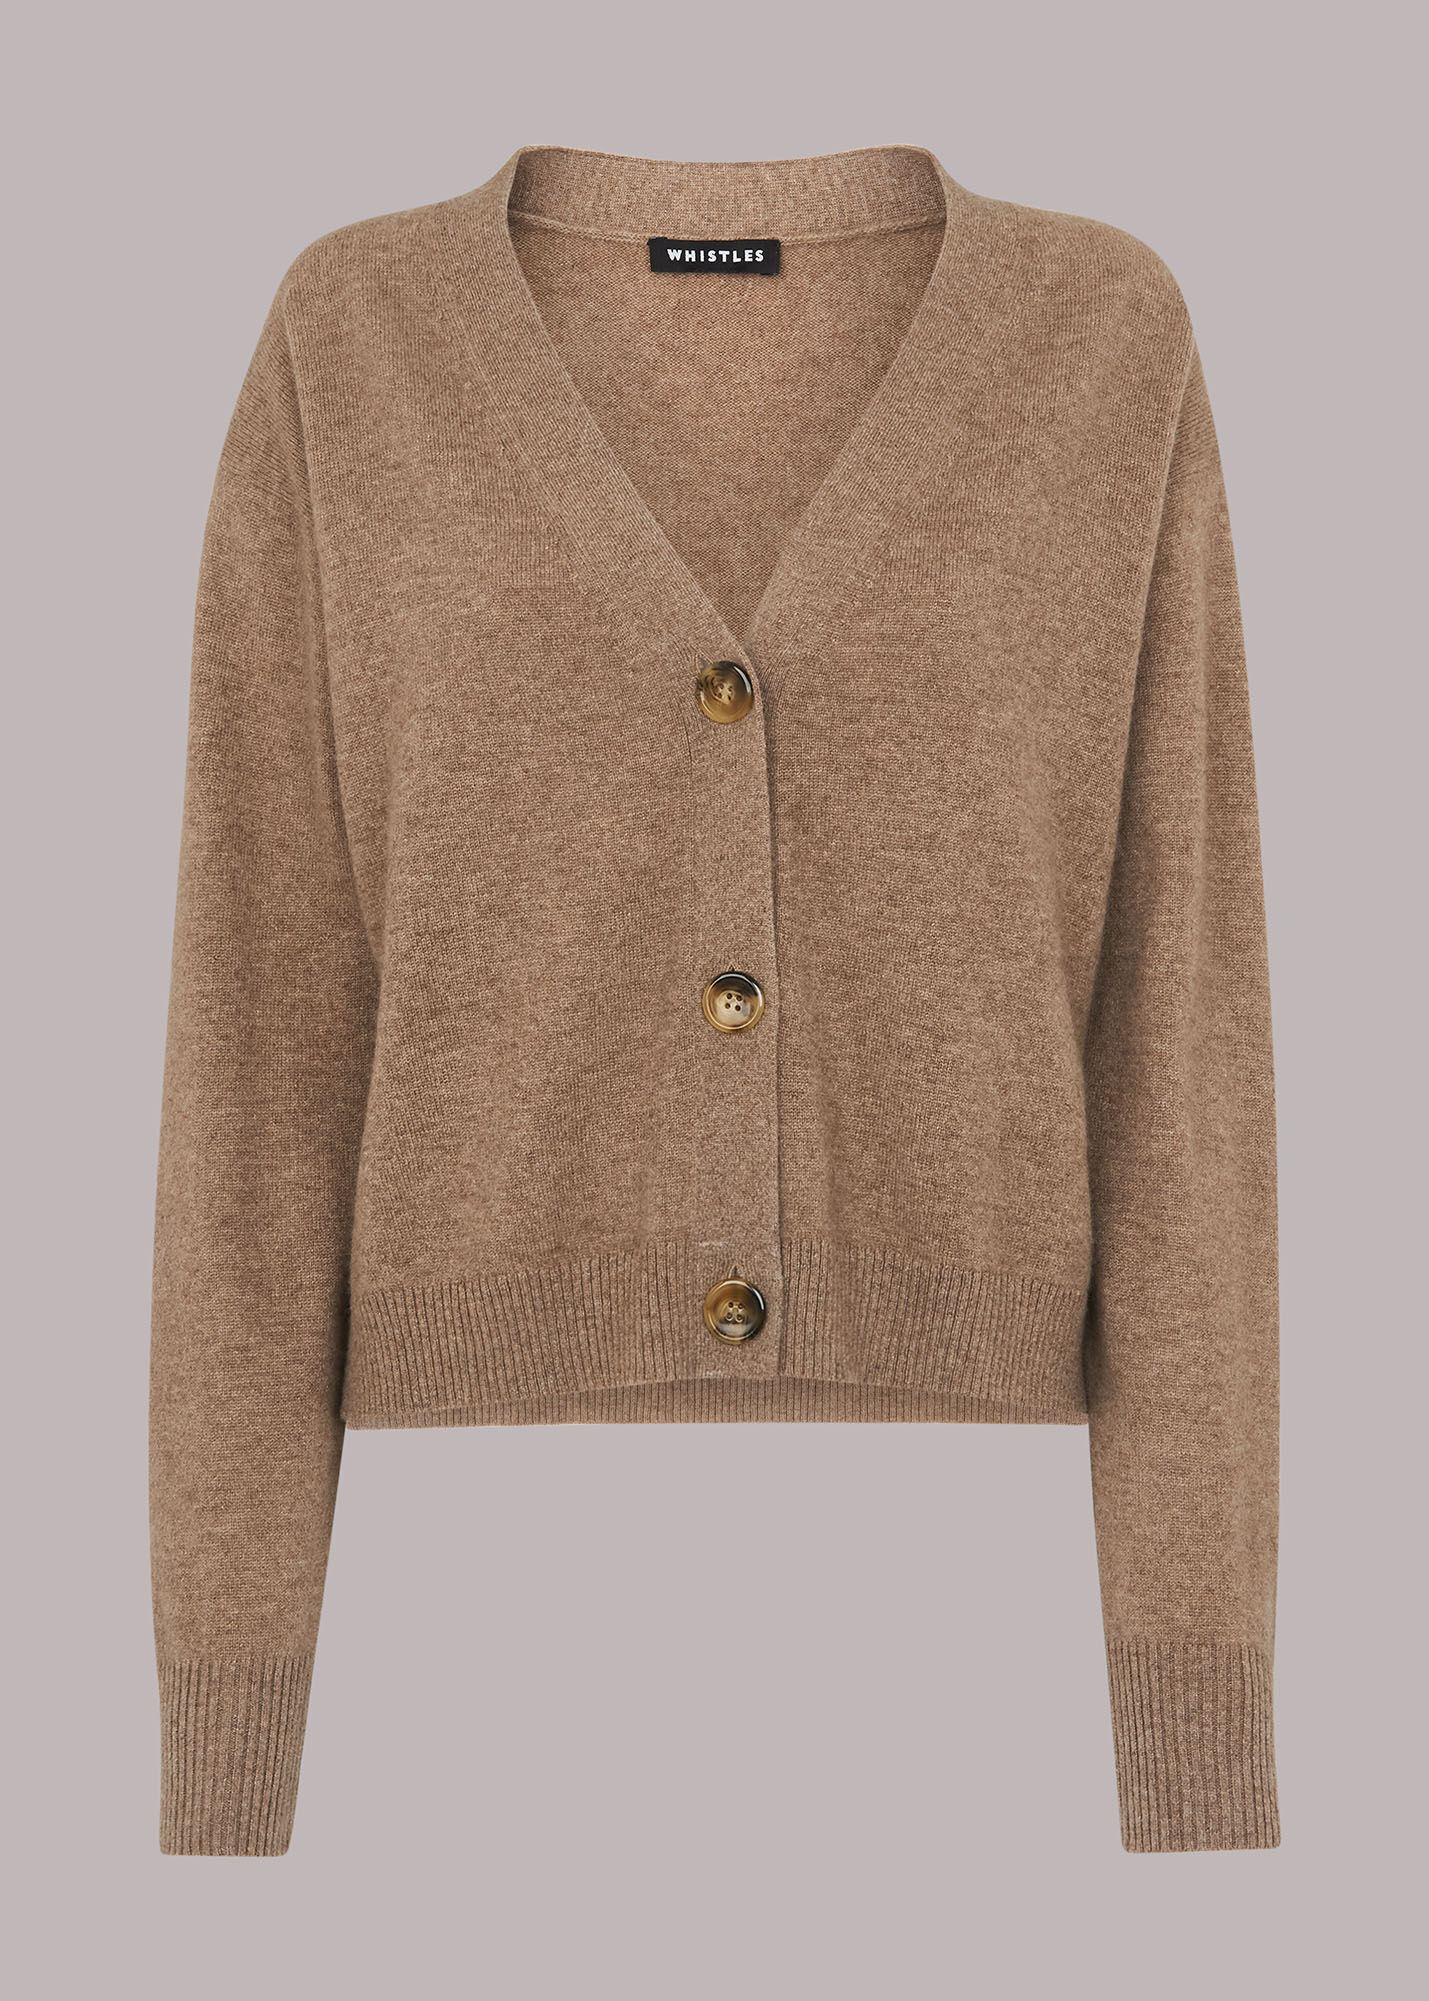 Oatmeal Cashmere Cardigan | WHISTLES | Whistles